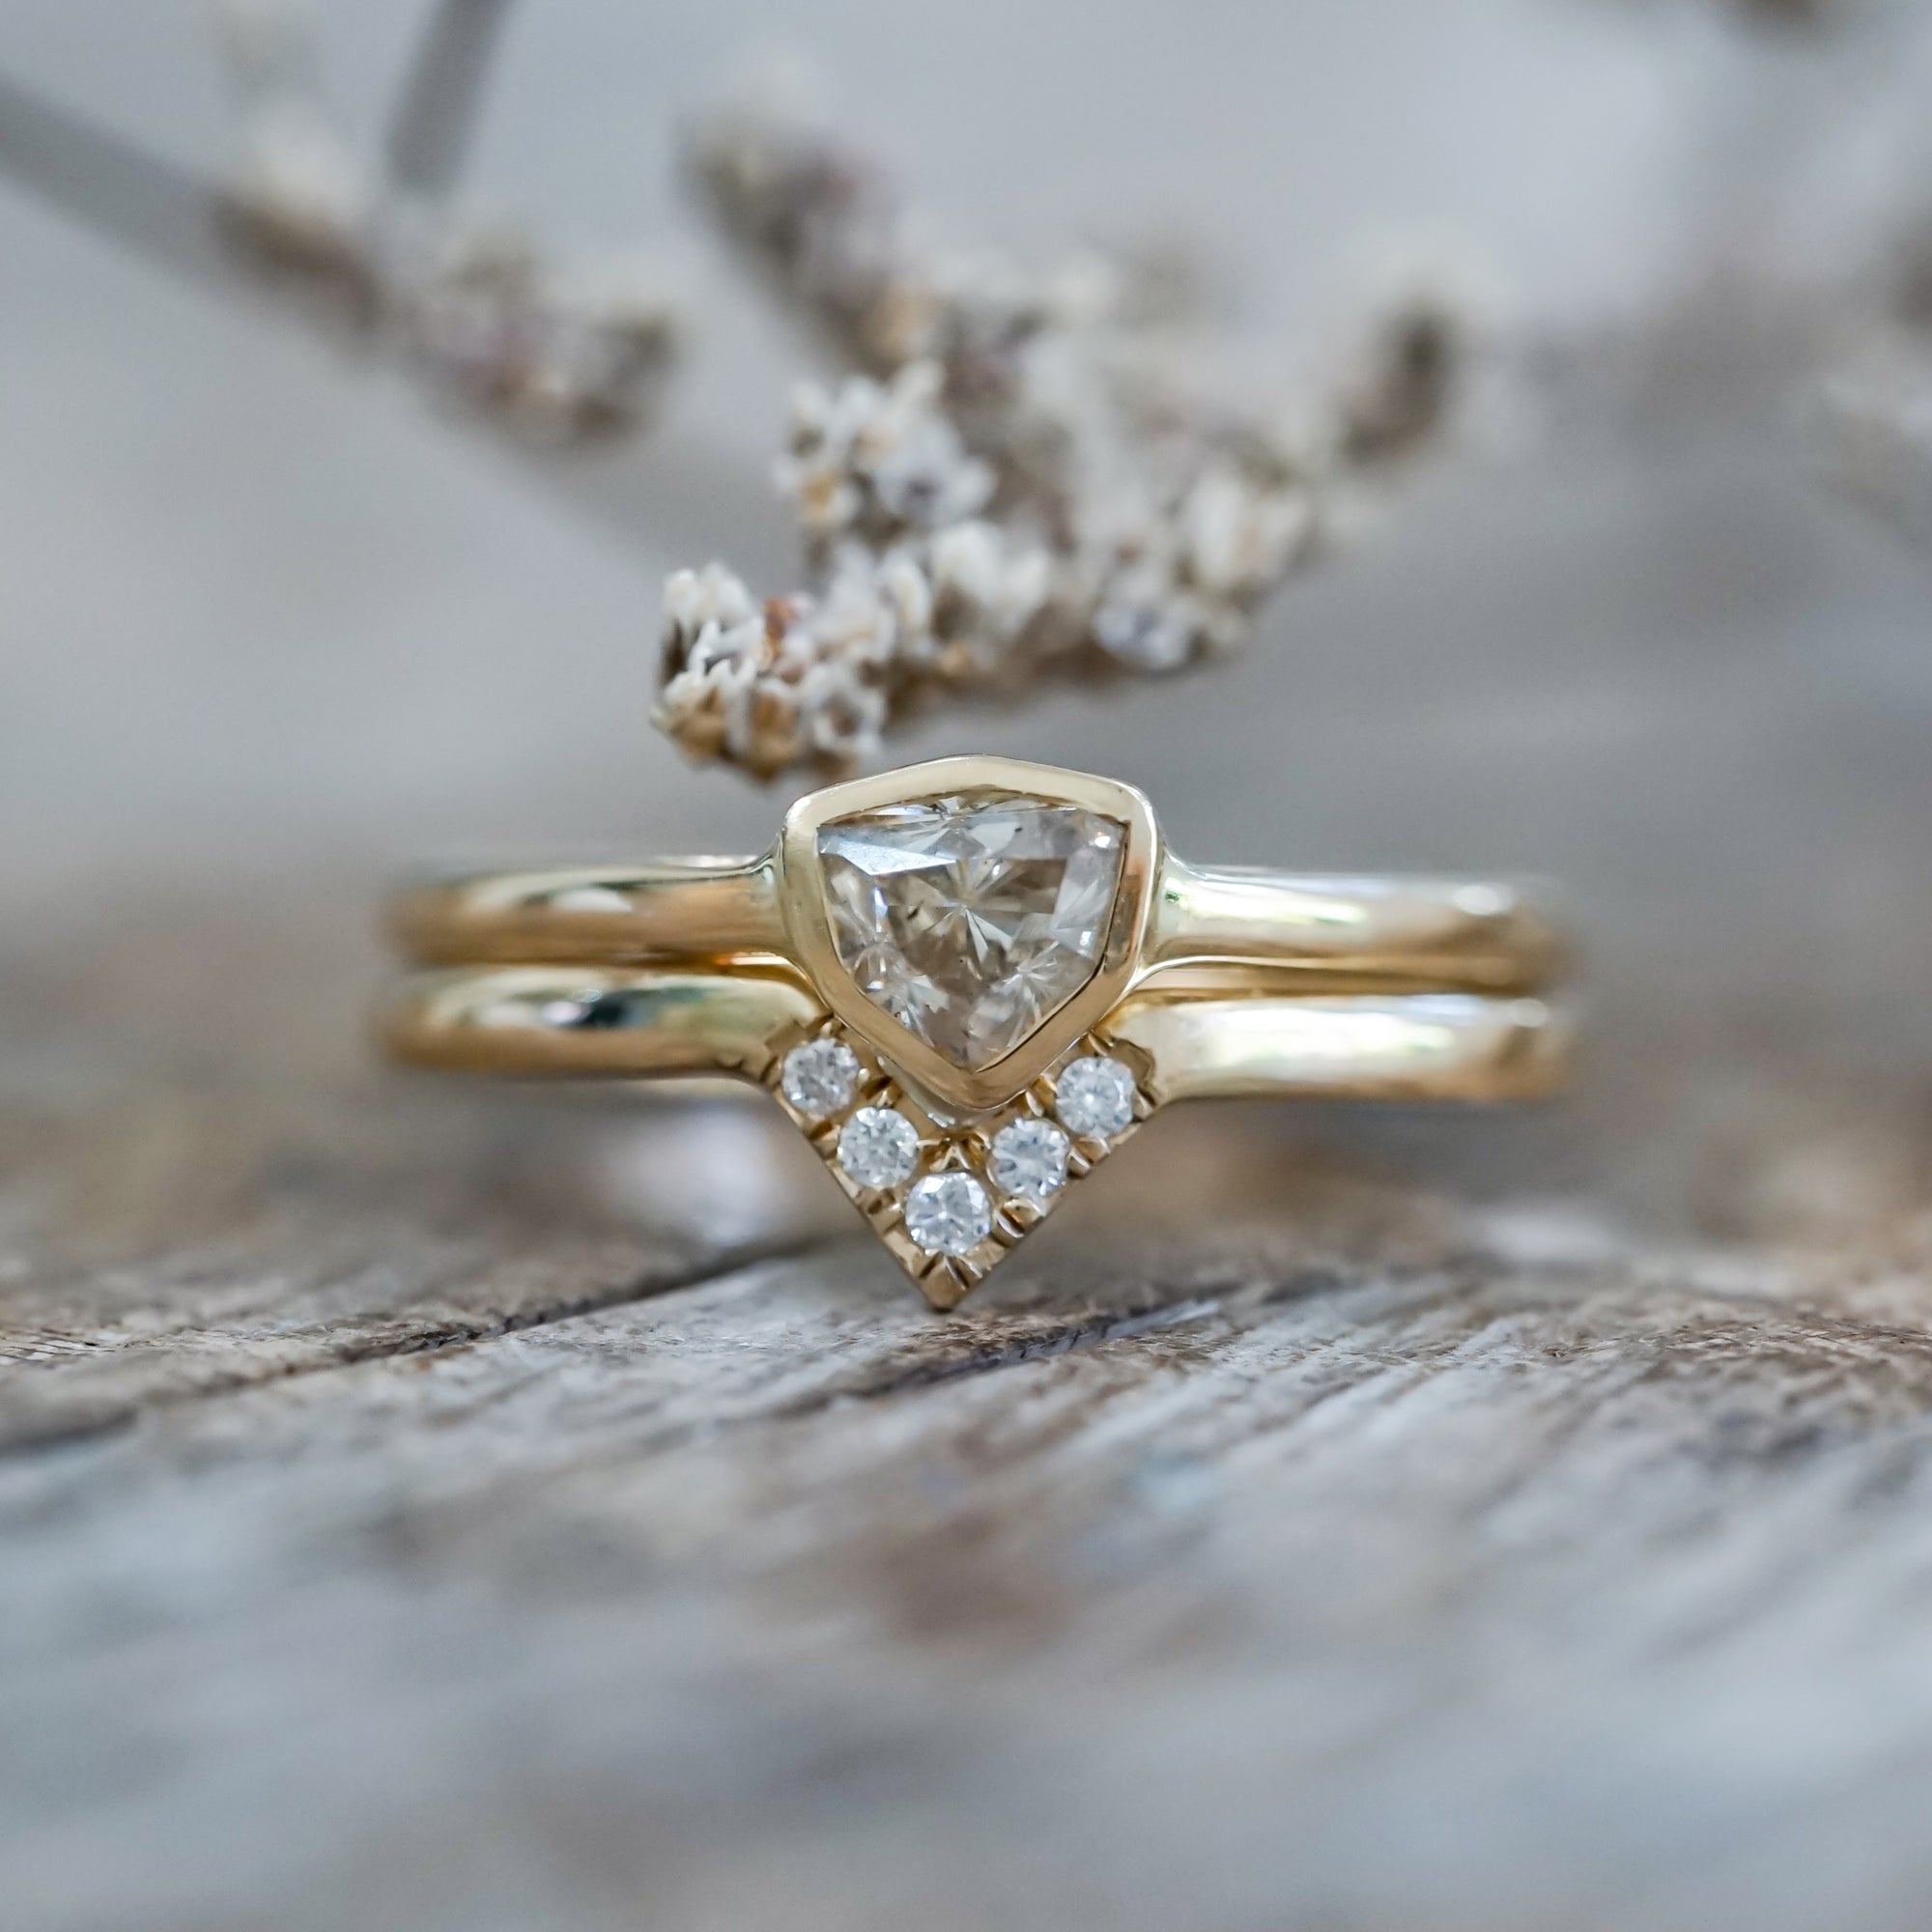 Shield Diamond Ring Set - Gardens of the Sun | Ethical Jewelry